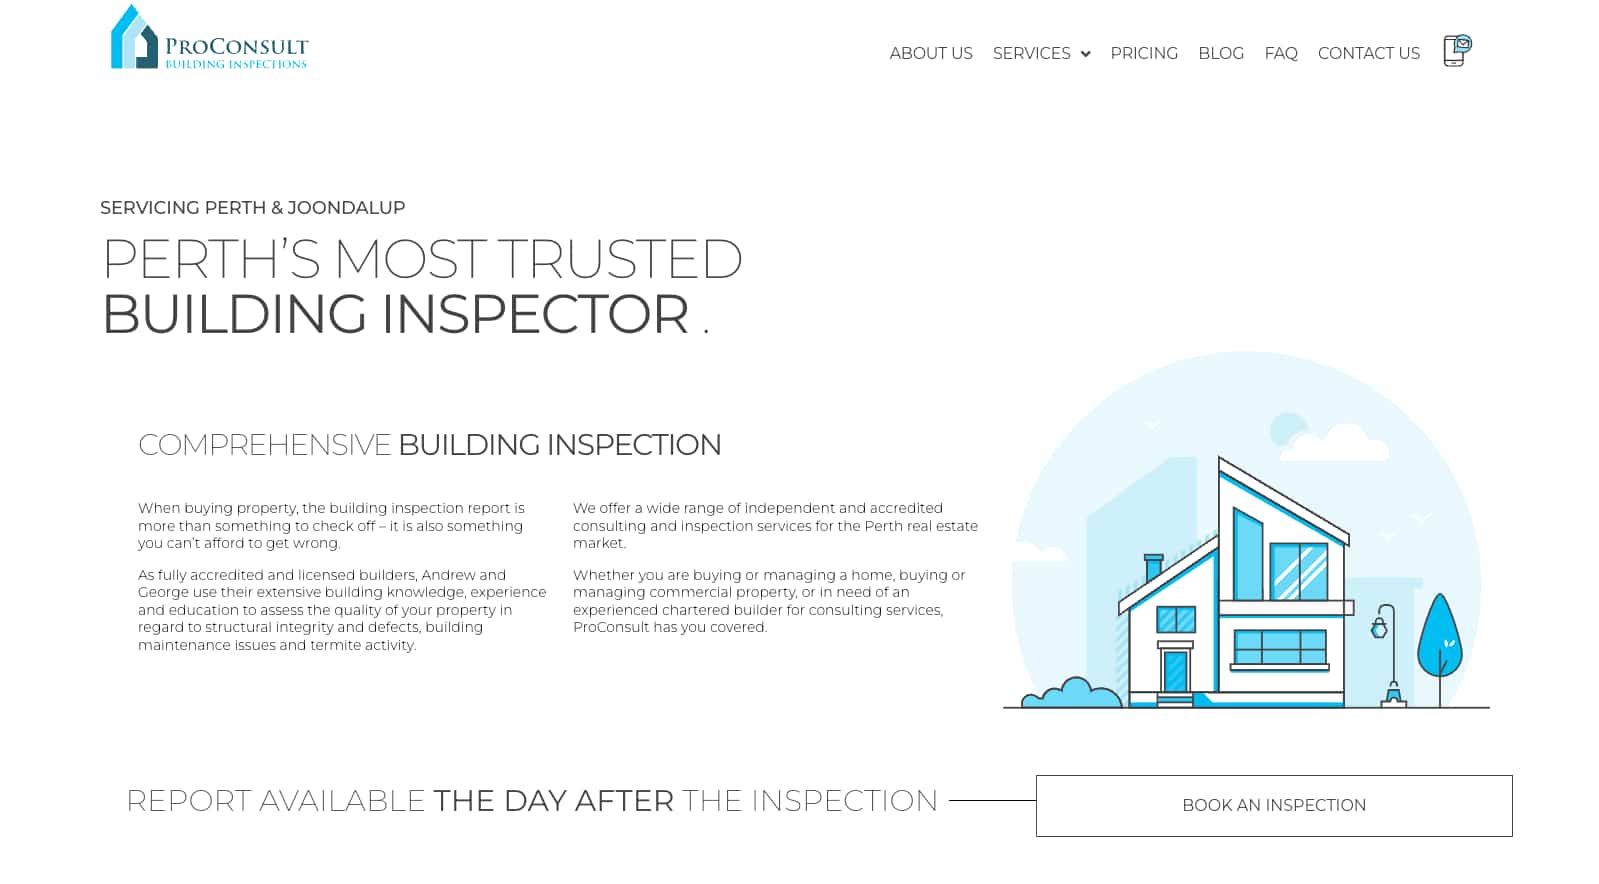 ProConsult Building Inspections